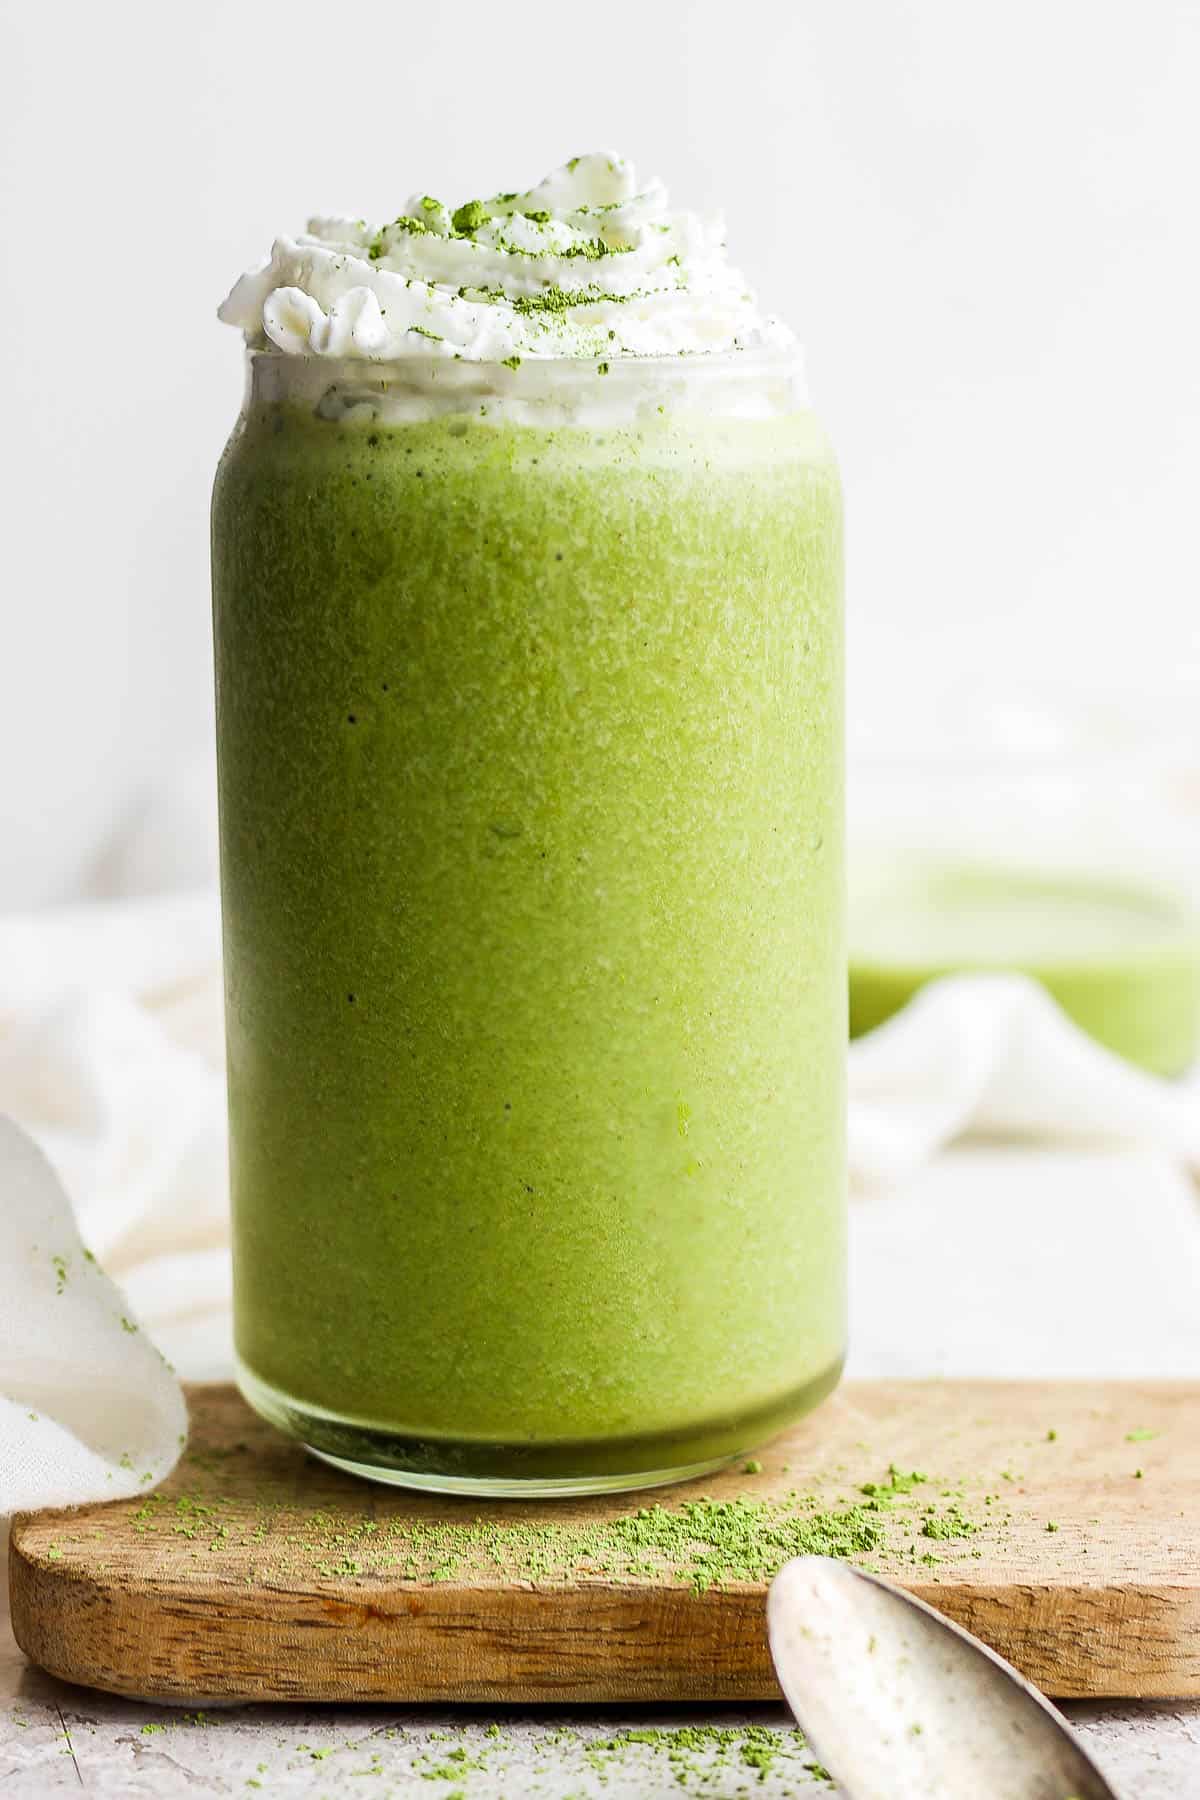 A matcha smoothie with whipped cream on top.